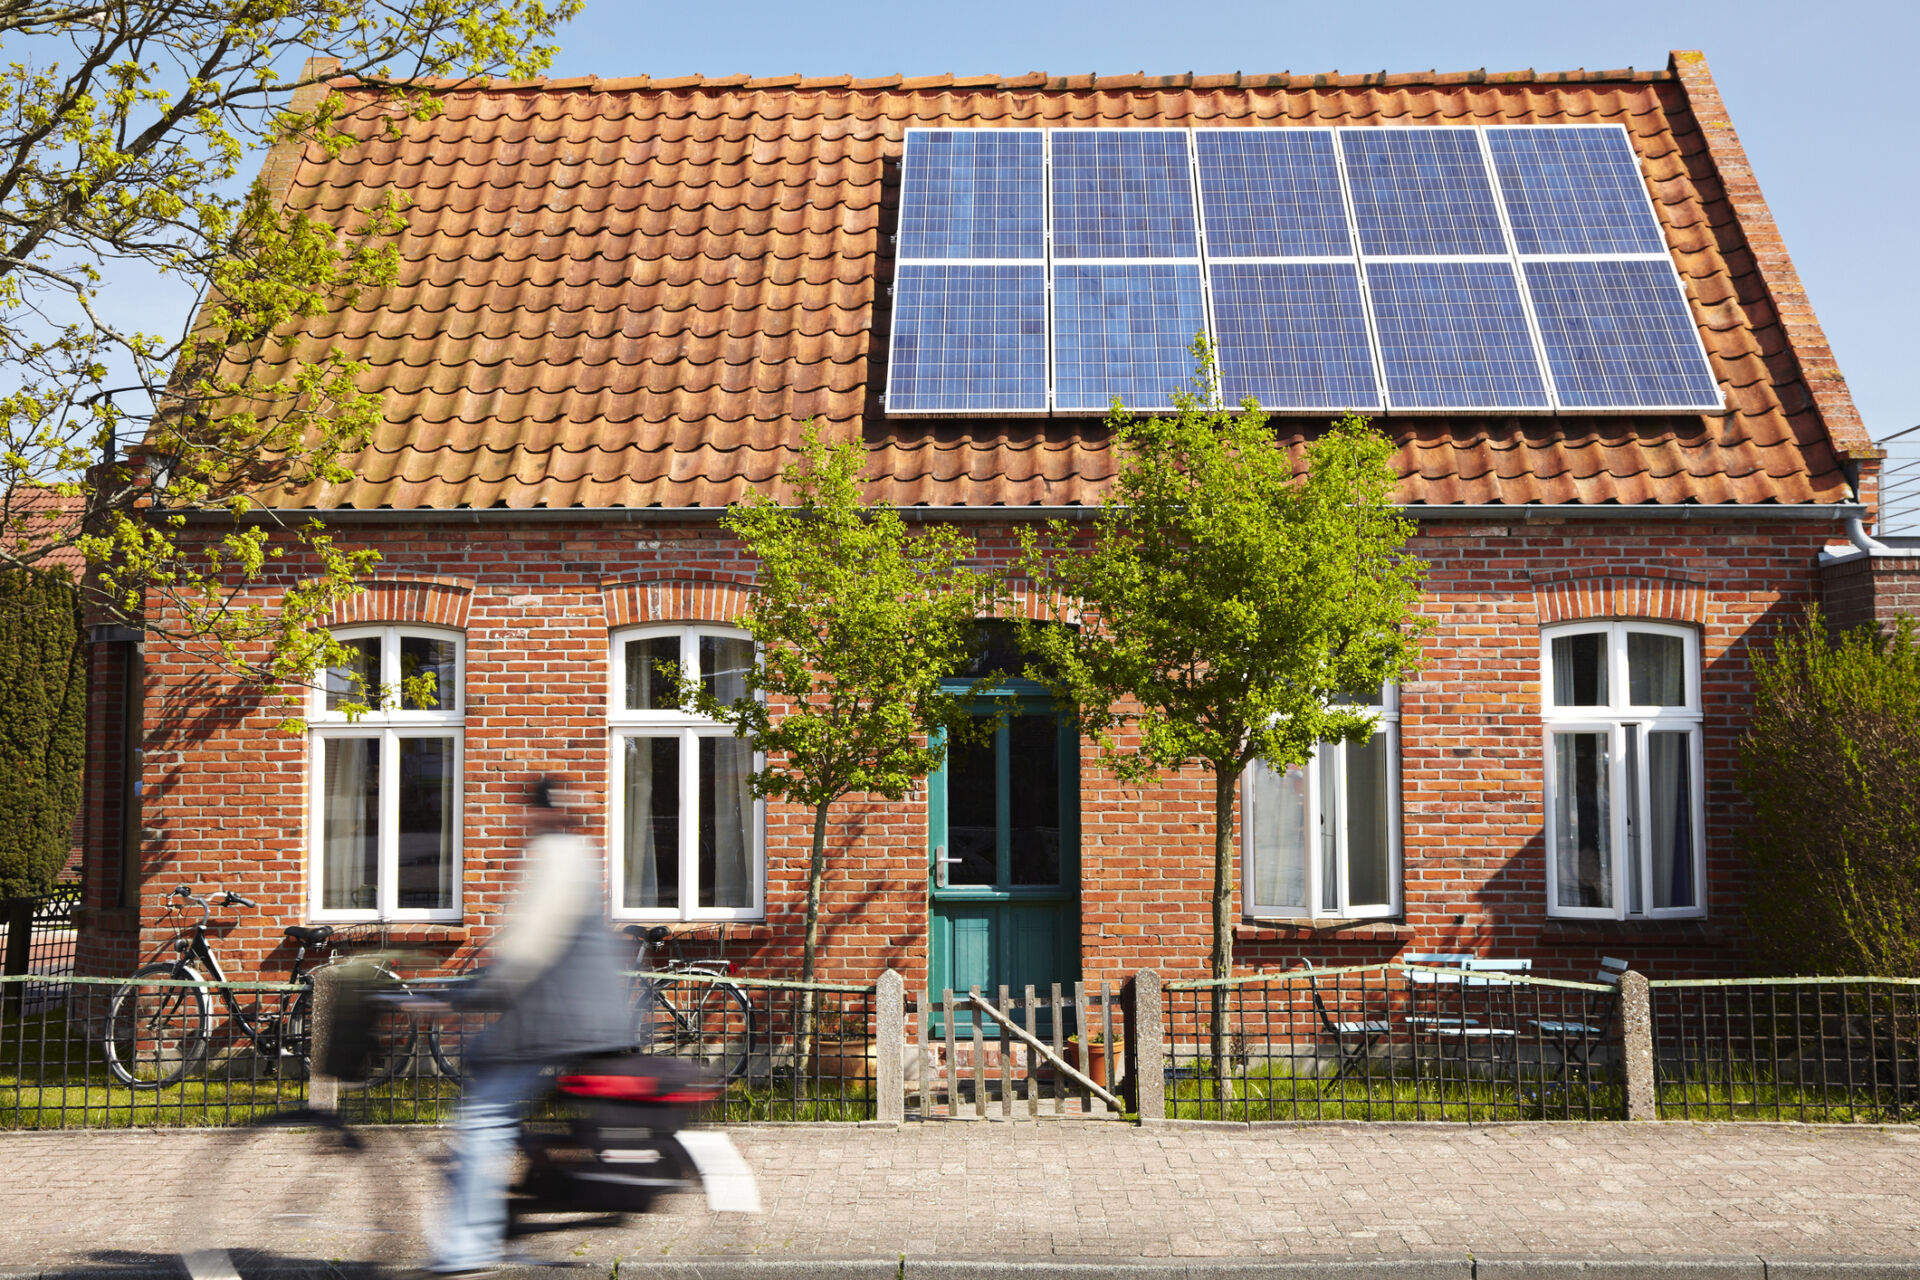 Little Traditional northern Brick house with photovoltaic technology on the roof